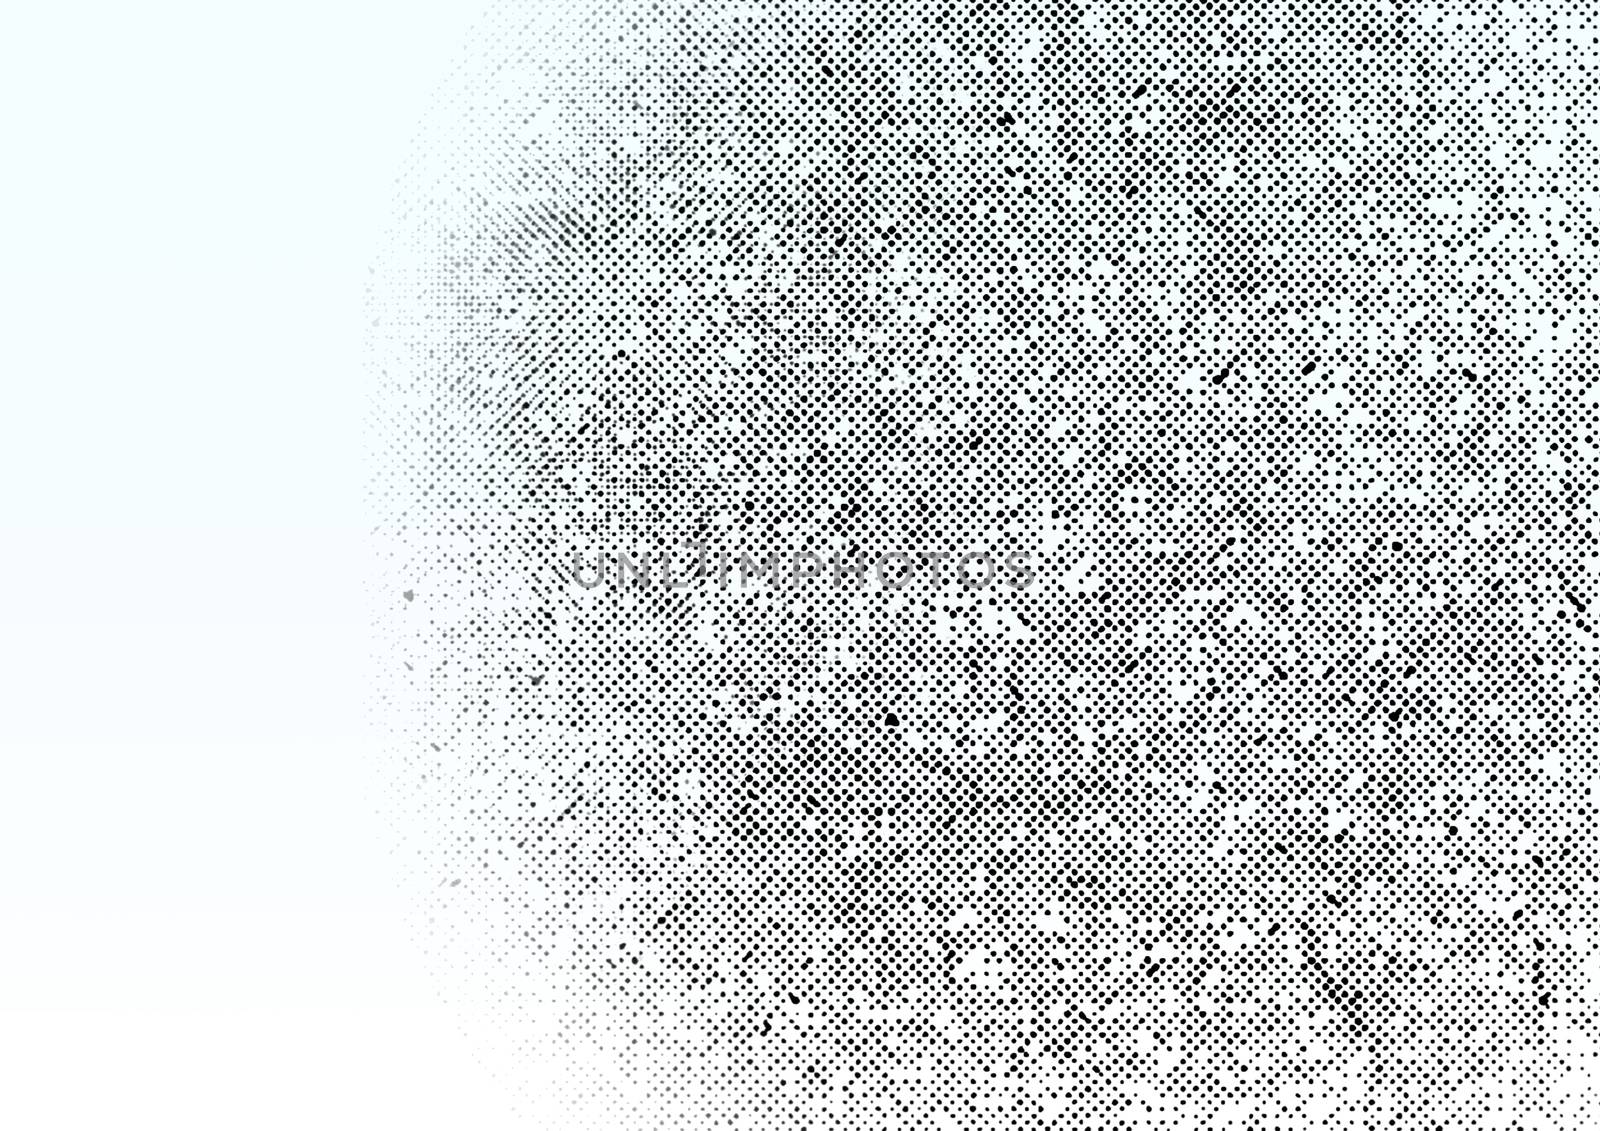 Grunge gradient dots vintage halftone ink background. Halftone gradient pattern made of dots with randomized circles. Pop art texture by asiandelight